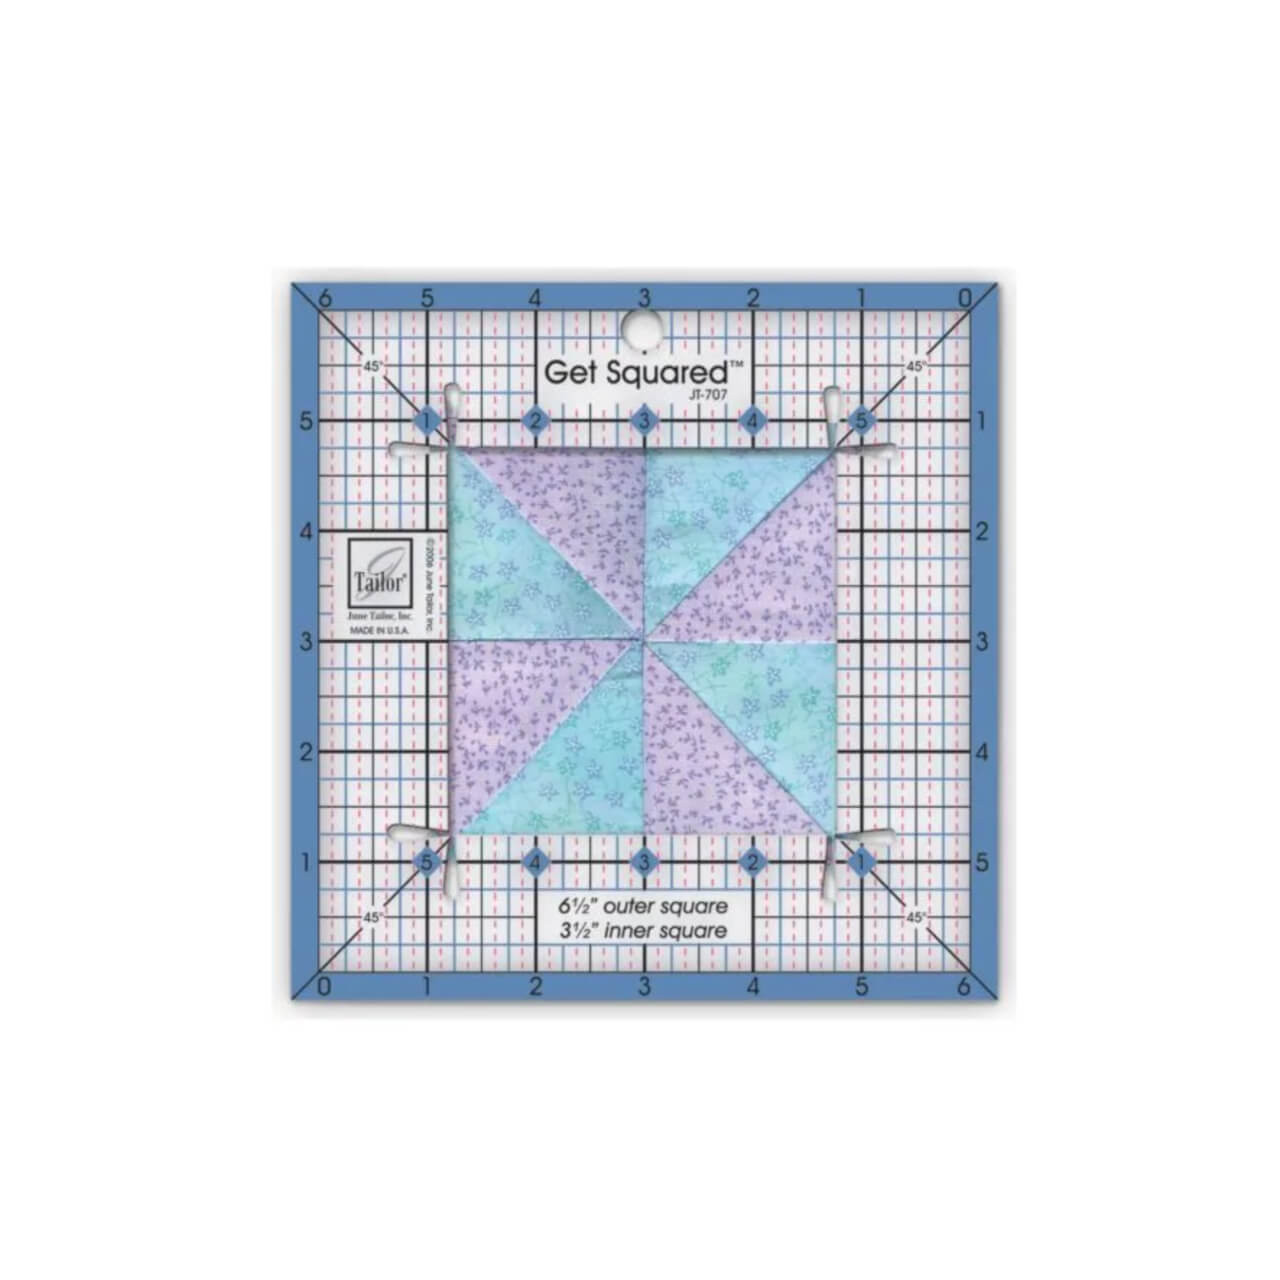 The Small Get Squared Ruler by June Tailor being used to measure and square up a patchwork quilt block with purple and blue fabrics, showcasing the clear central cutout and precise grid lines for accurate fabric cutting.